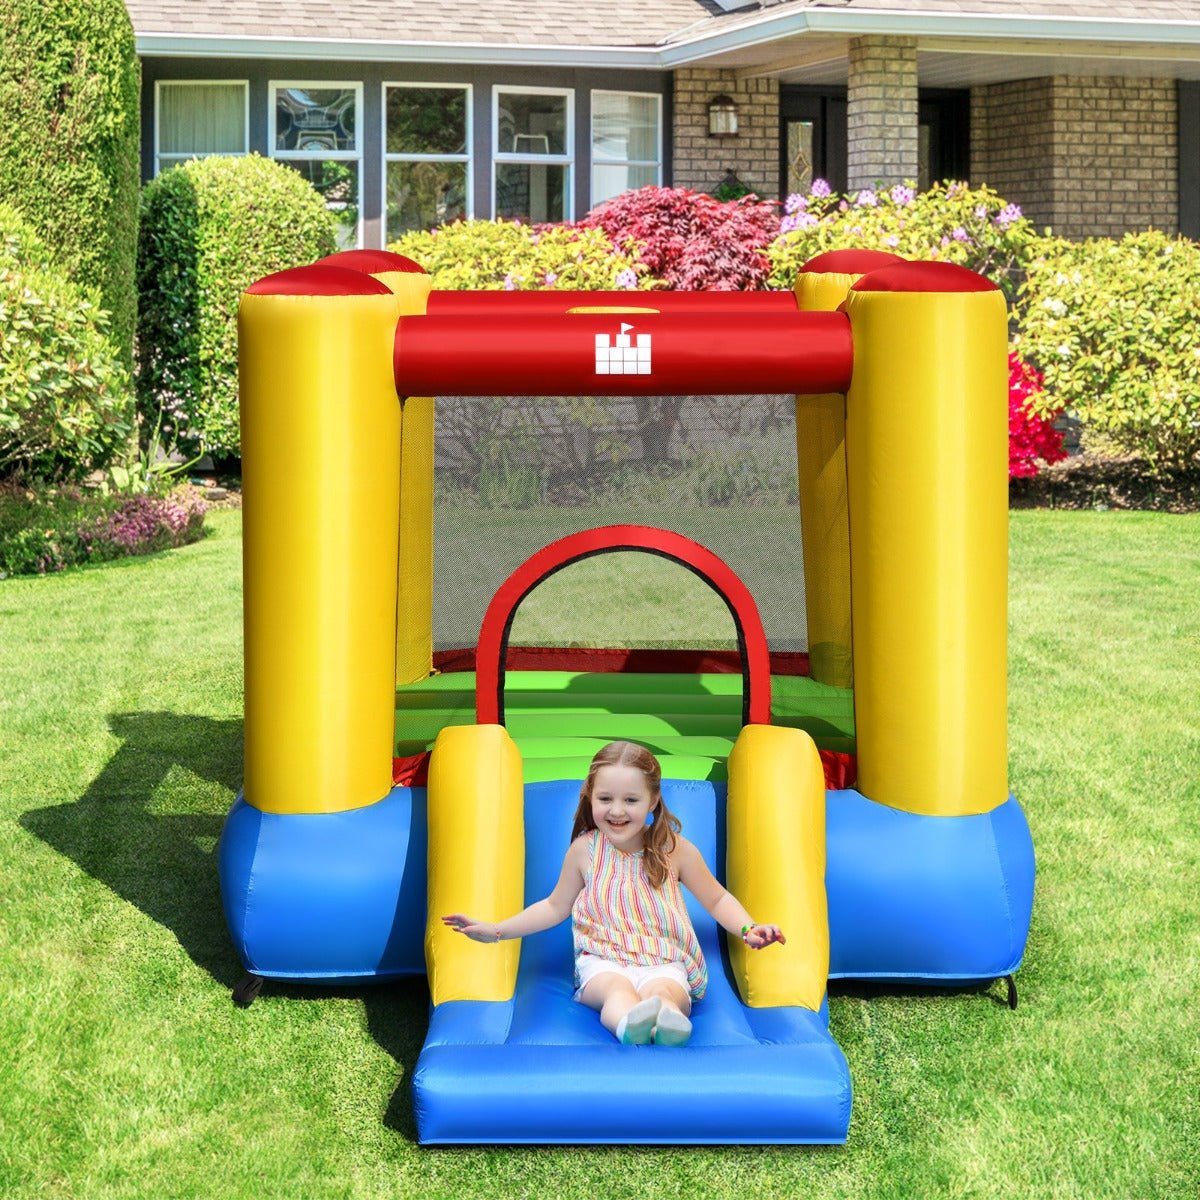 Boundless Energy: Inflatable Bounce House Slide for Happy Kids